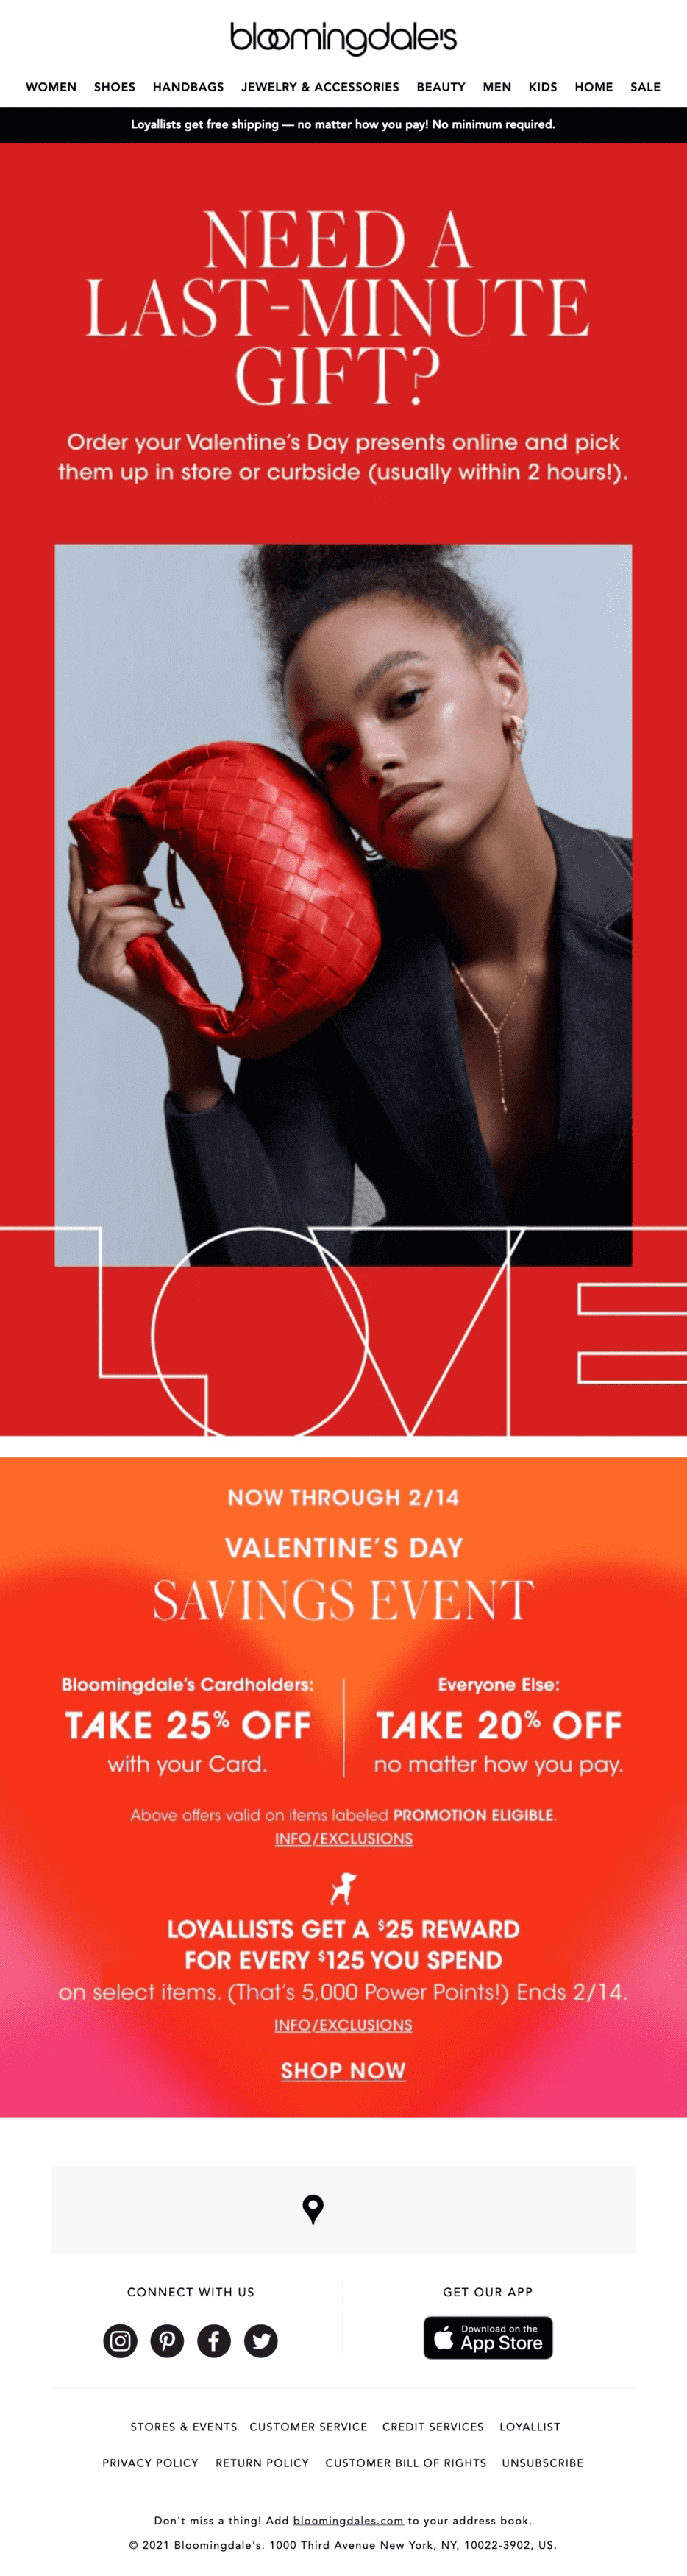 Valentine’s Day email from Bloomingdales with the banner text “Need a last-minute gift?”